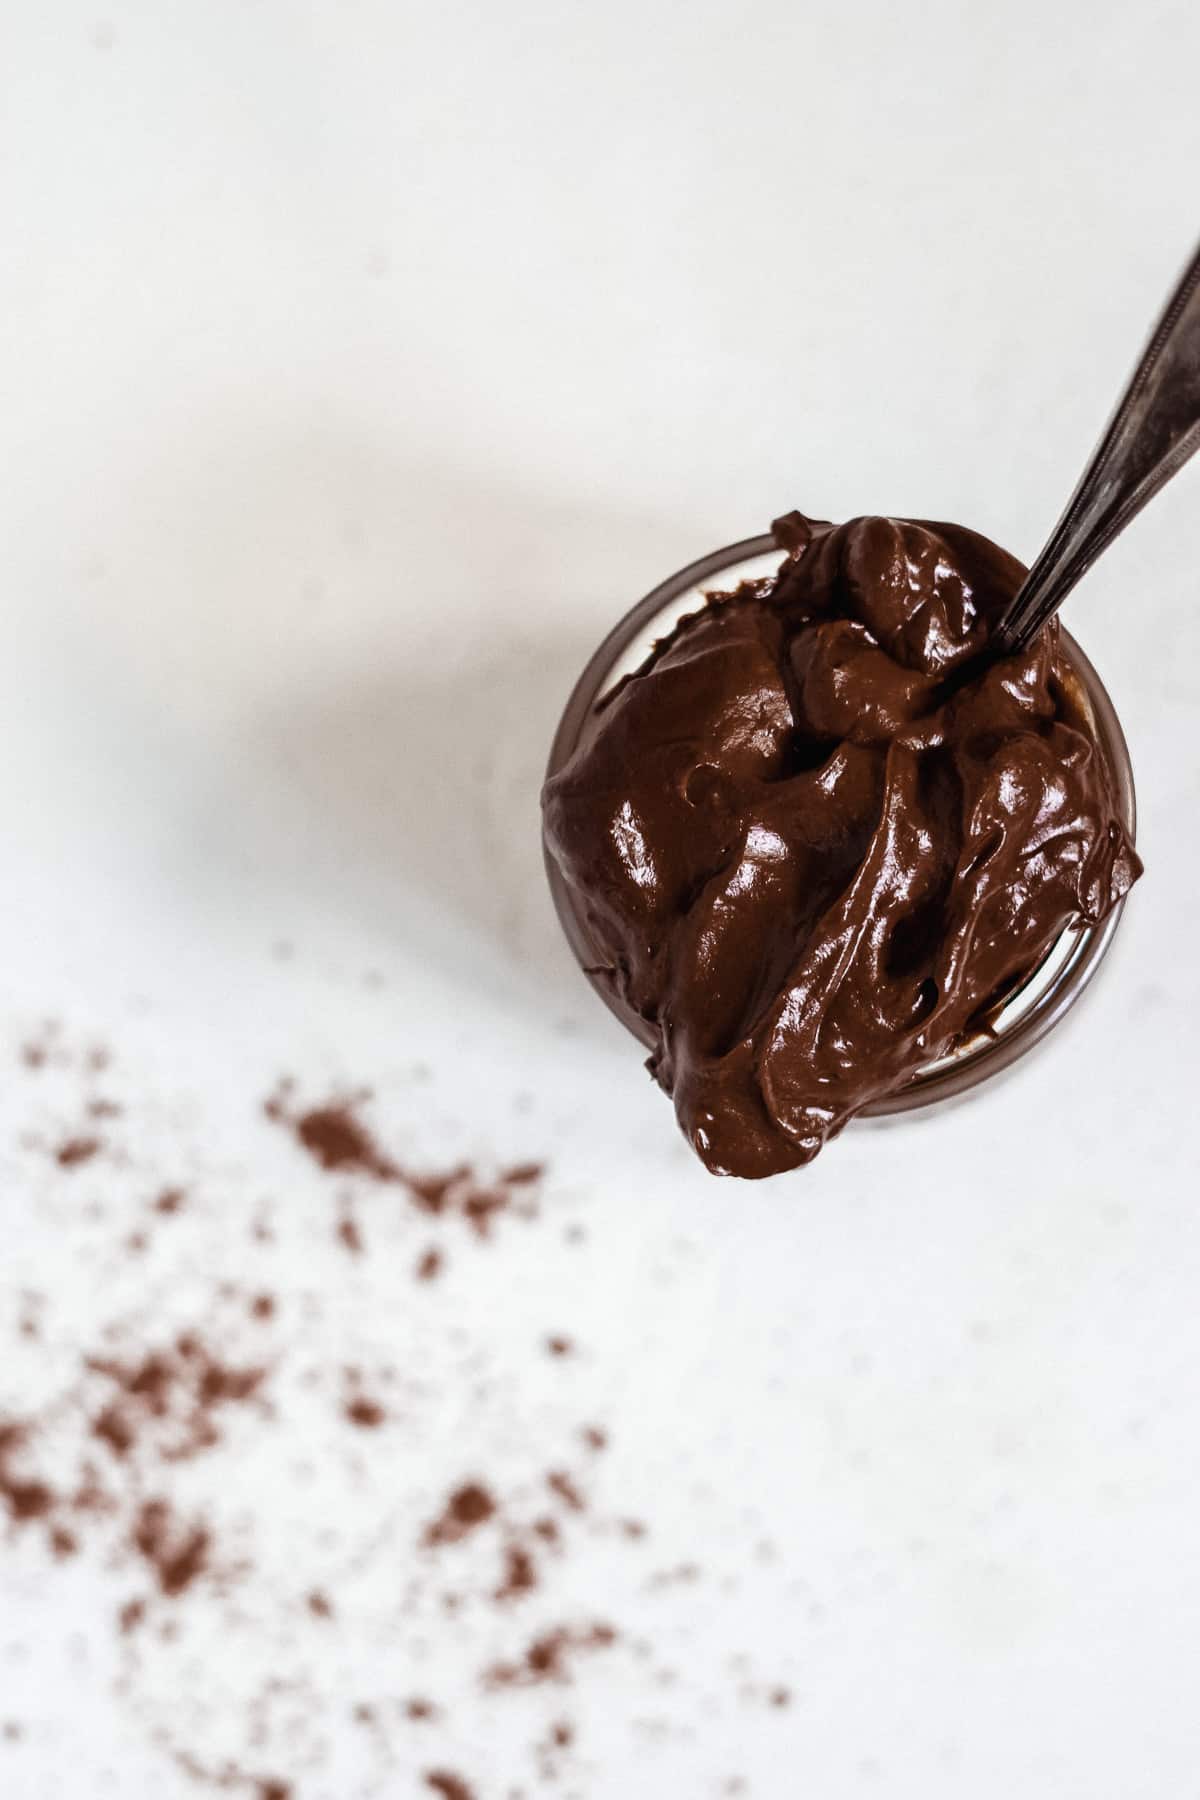 Overhead view of a jar with chocolate frosting on a white surface.